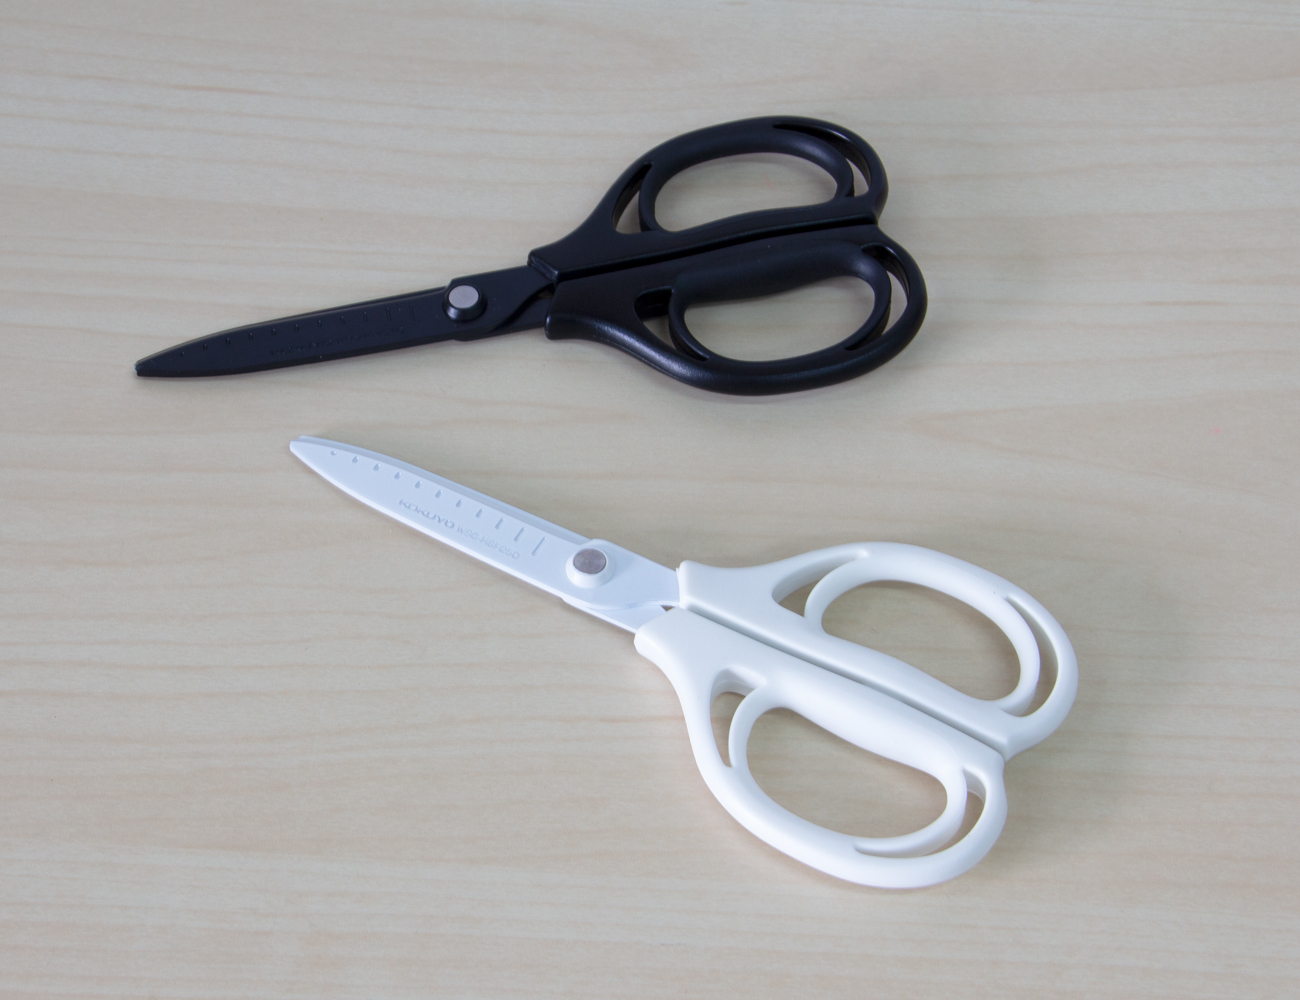 Crafting Stainless Scissors